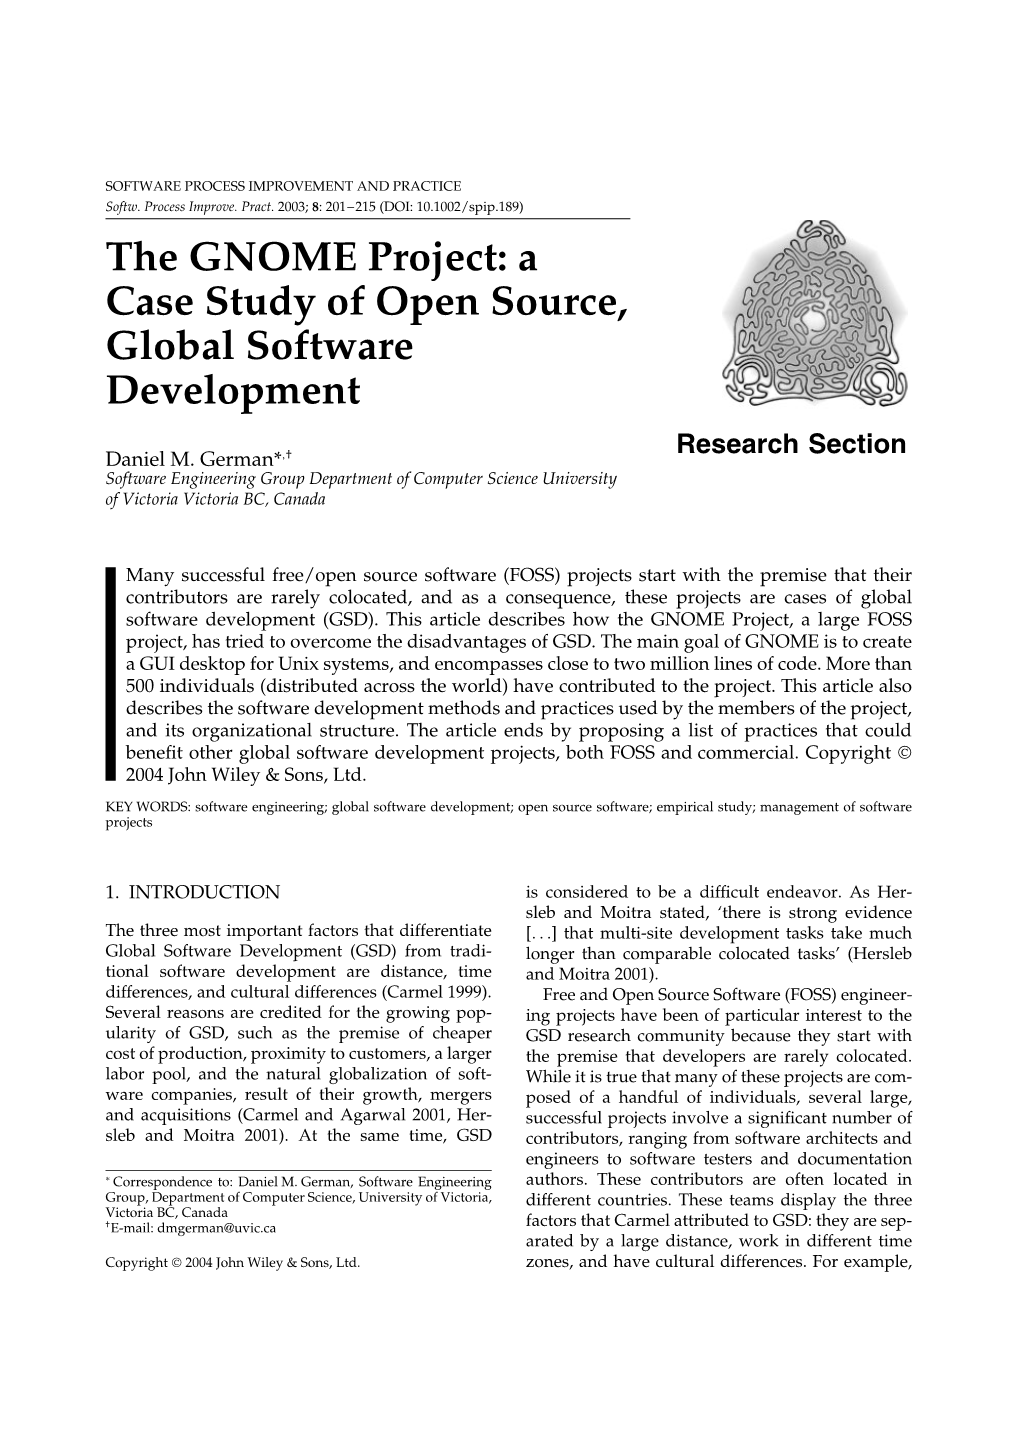 The GNOME Project: a Case Study of Open Source, Global Software Development Research Section Daniel M